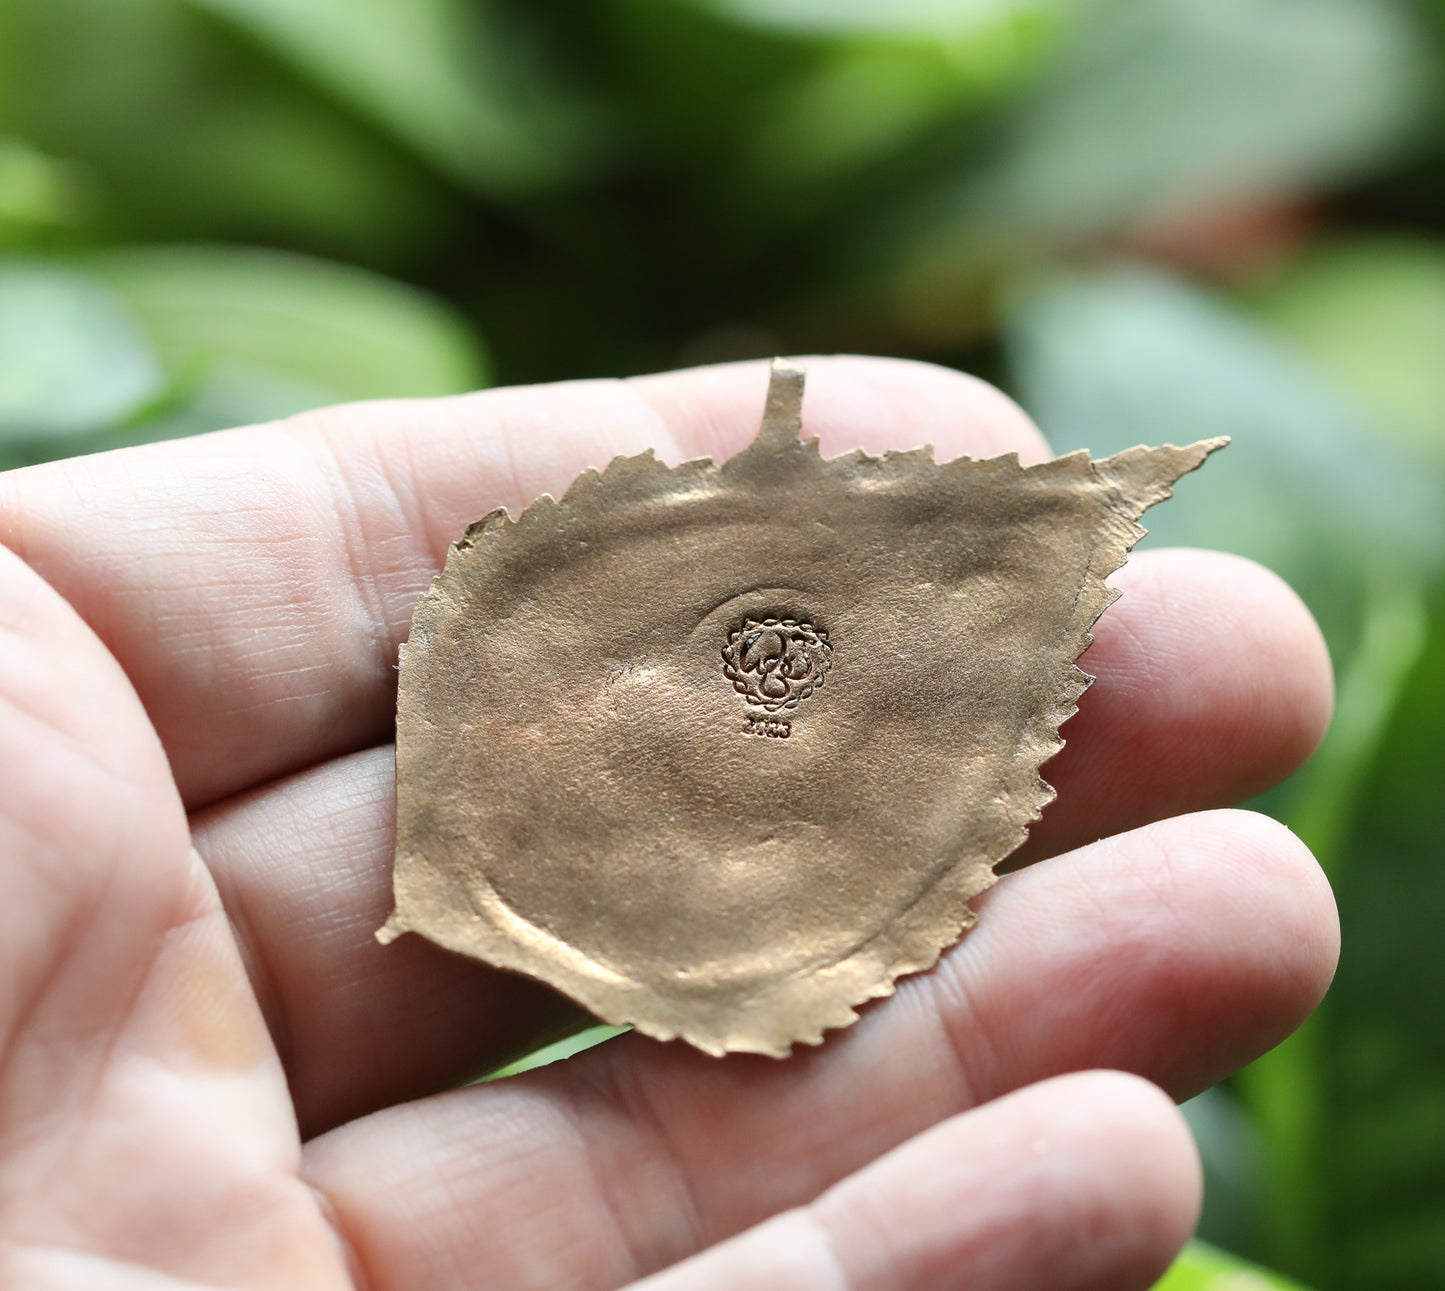 Handmade Birch Leaf pendant with Beautiful Image Featuring a tree